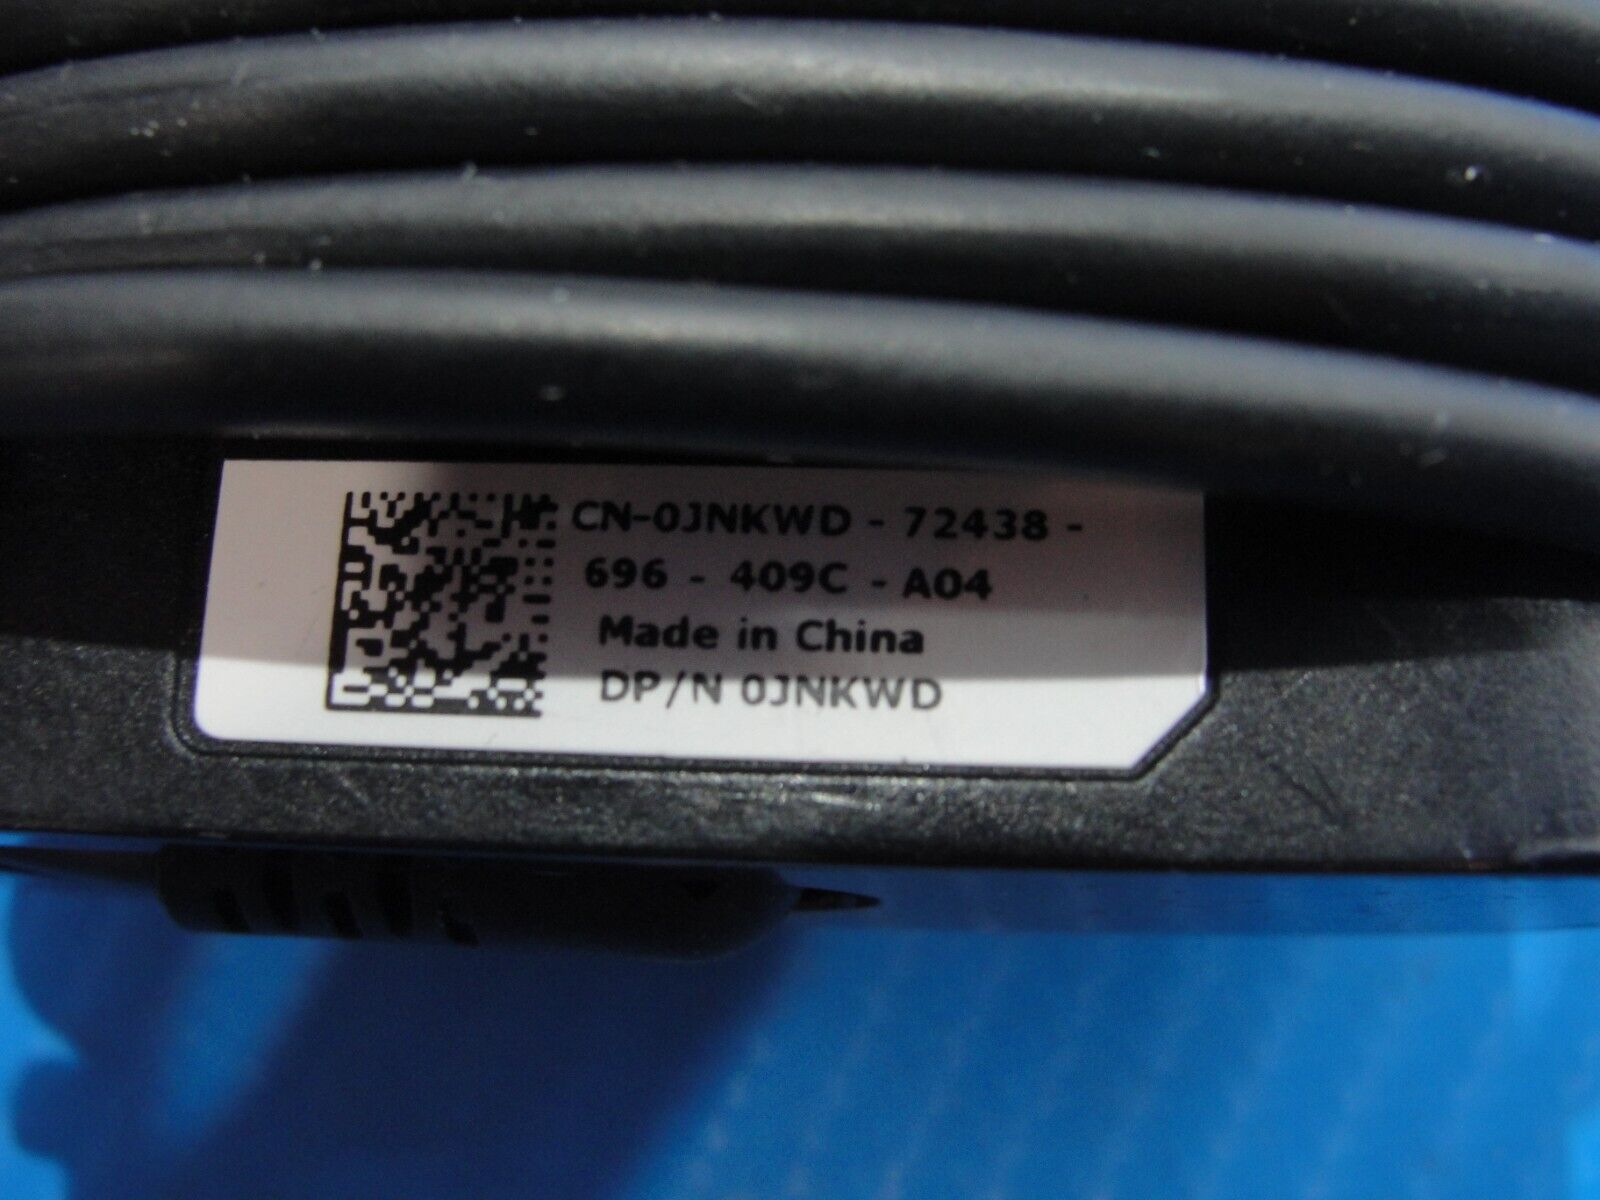 Genuine Dell AC Power Adapter Charger 19.5V 3.34A 65W LA65NM130 0JNKWD